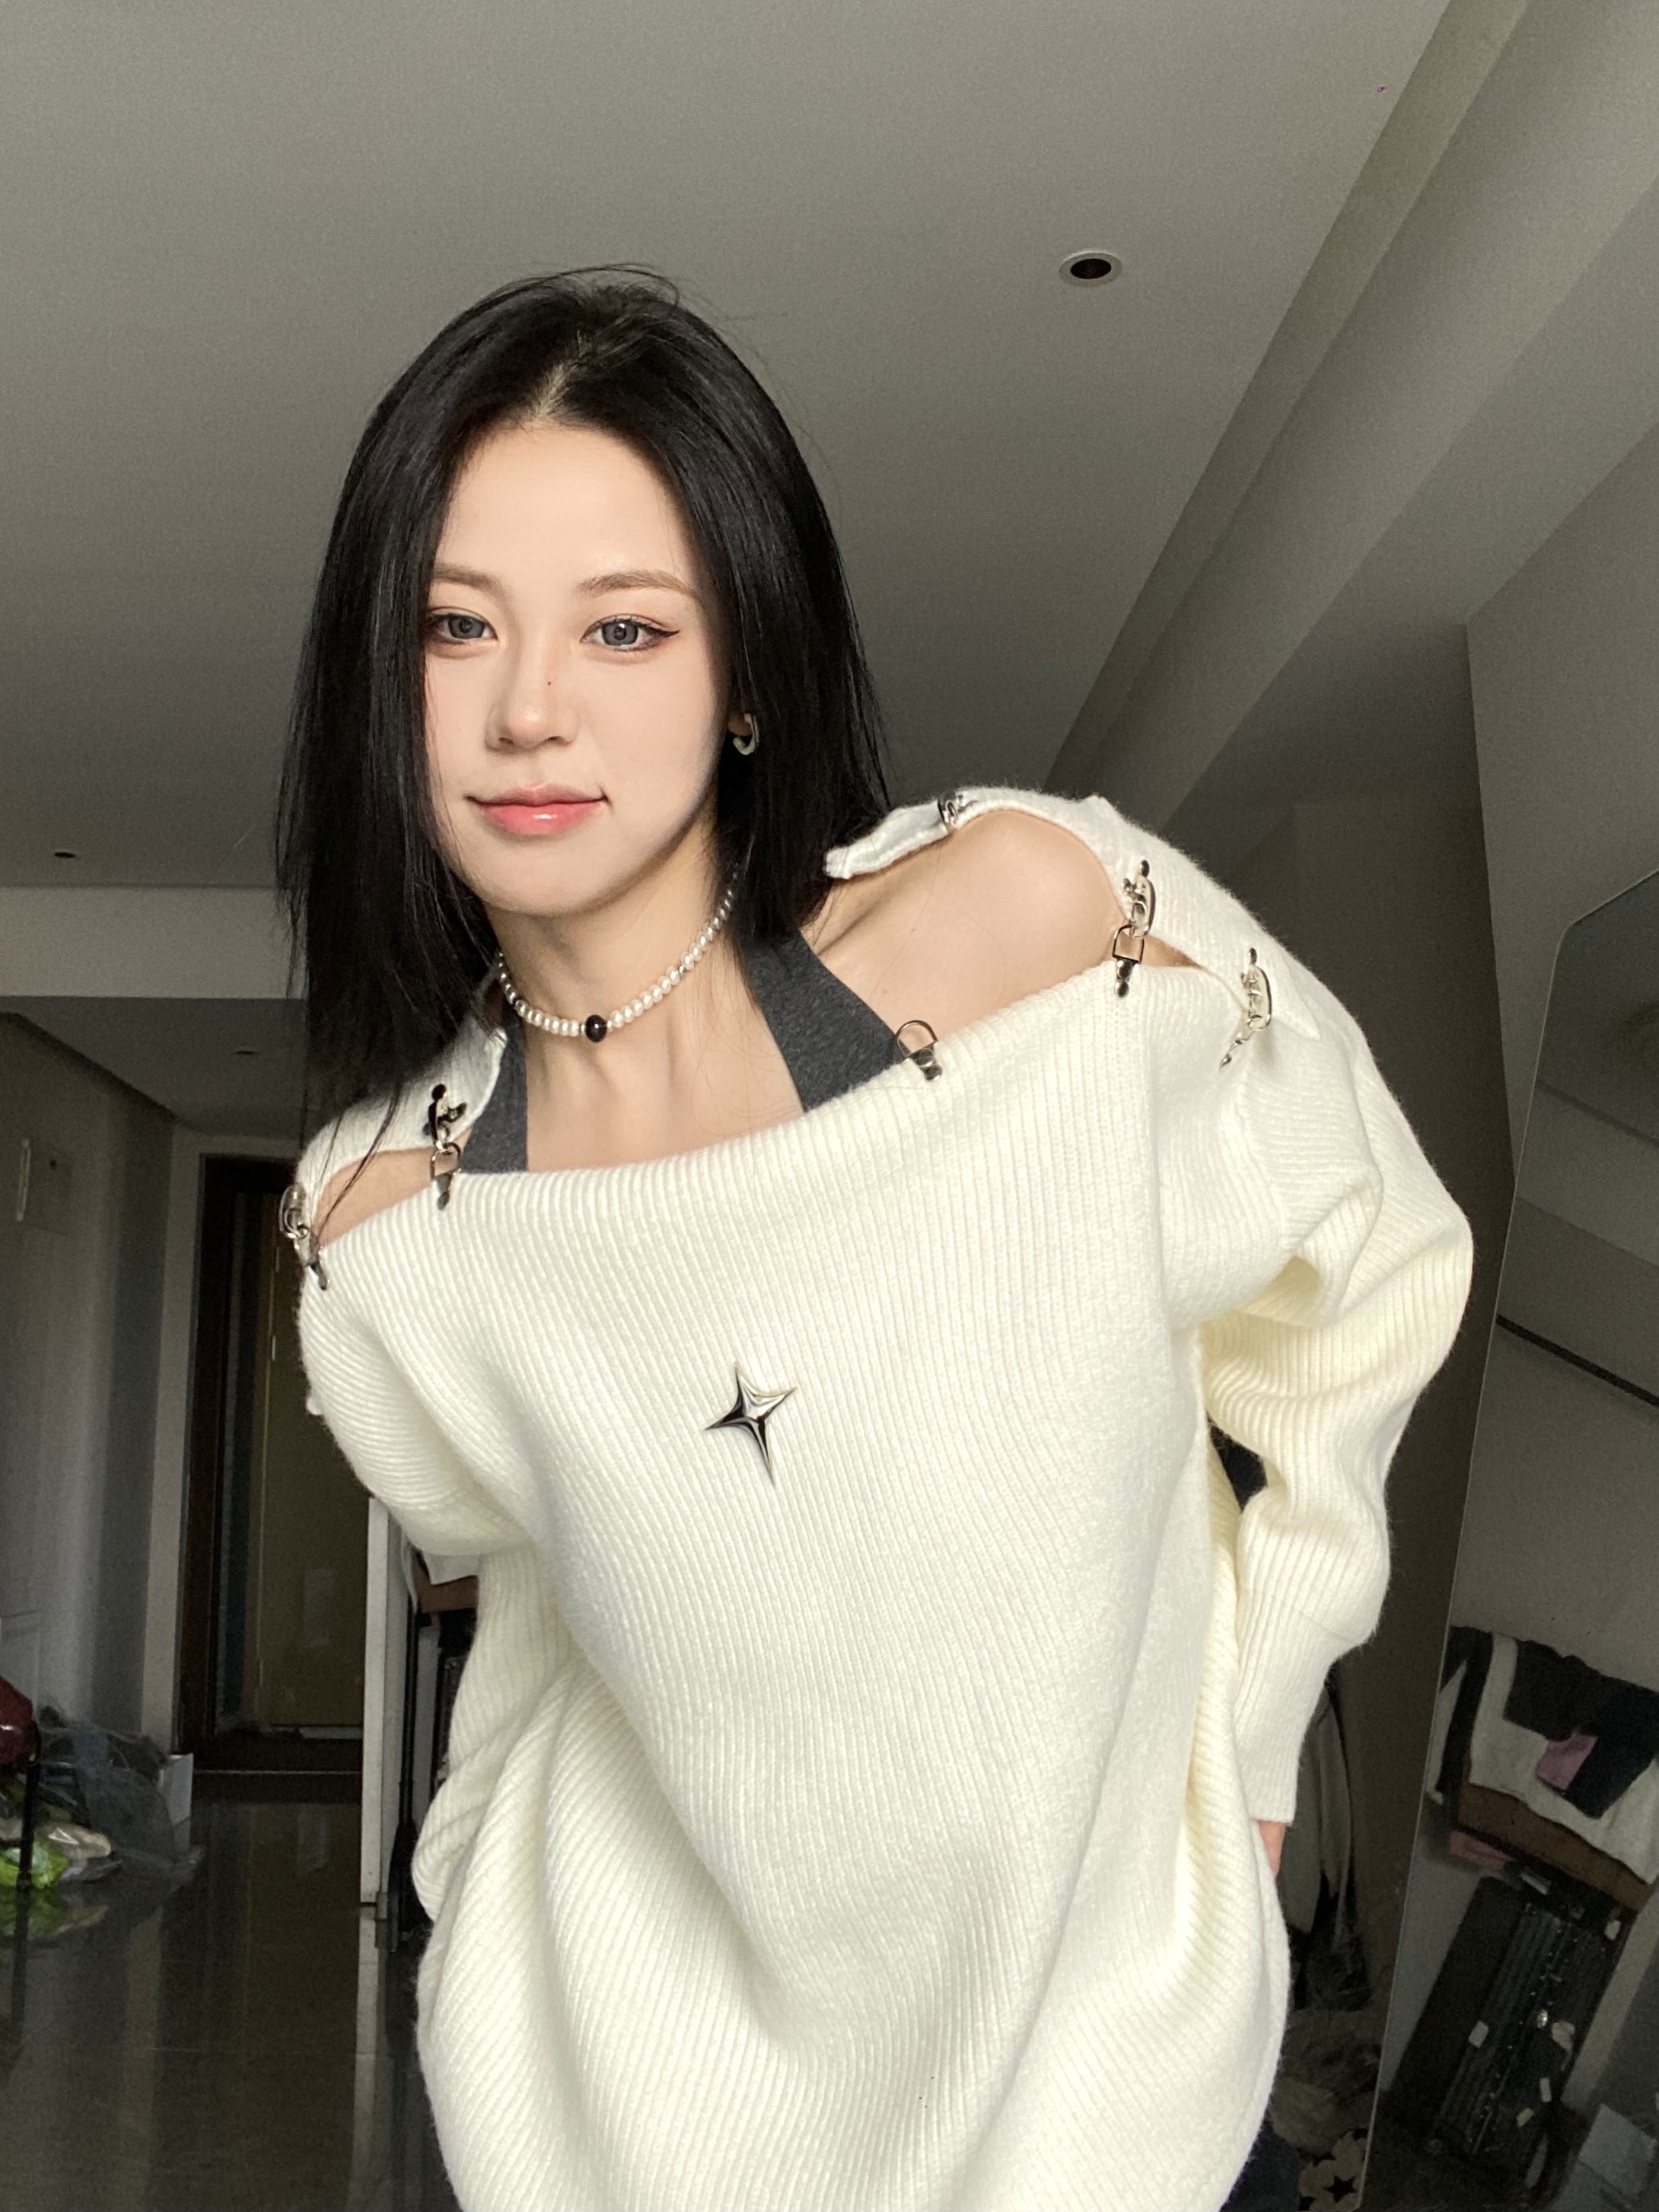 Sheep cashmere #aircraft buckle hot girl off-shoulder sweater women's autumn and winter design off-shoulder hollow atmosphere knitted top